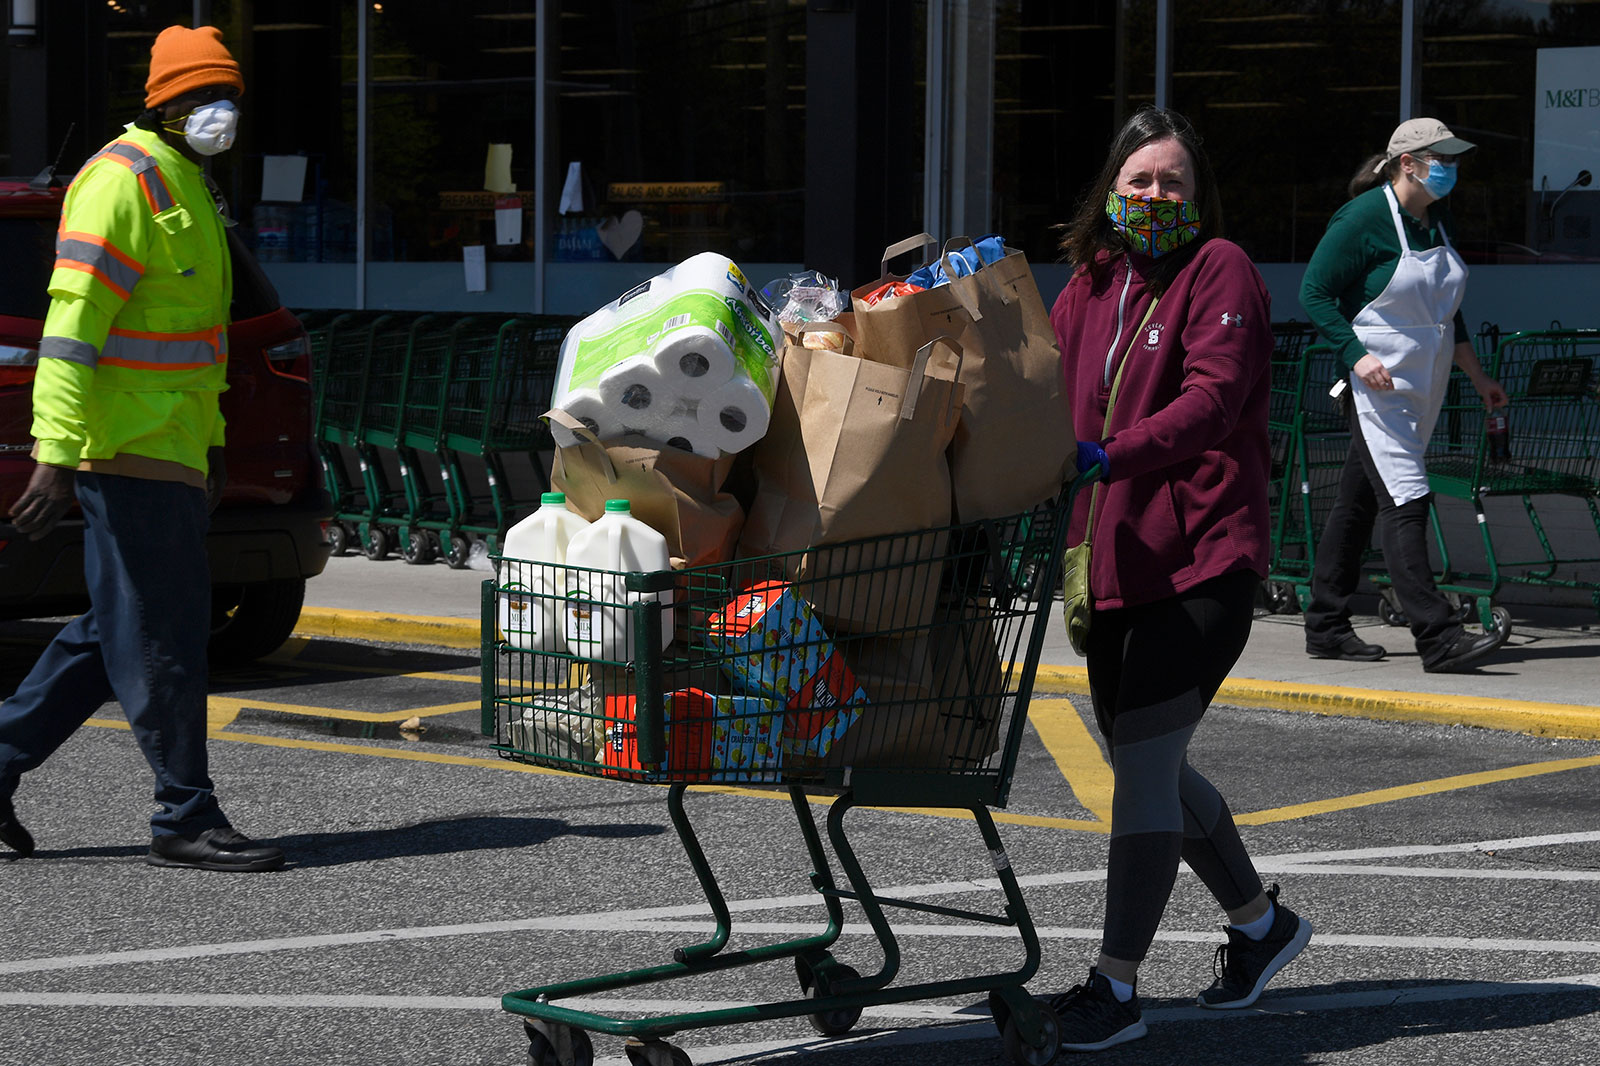 Michelle Ervin exits a grocery store while wearing a mask in Annapolis, Maryland, on April 15.